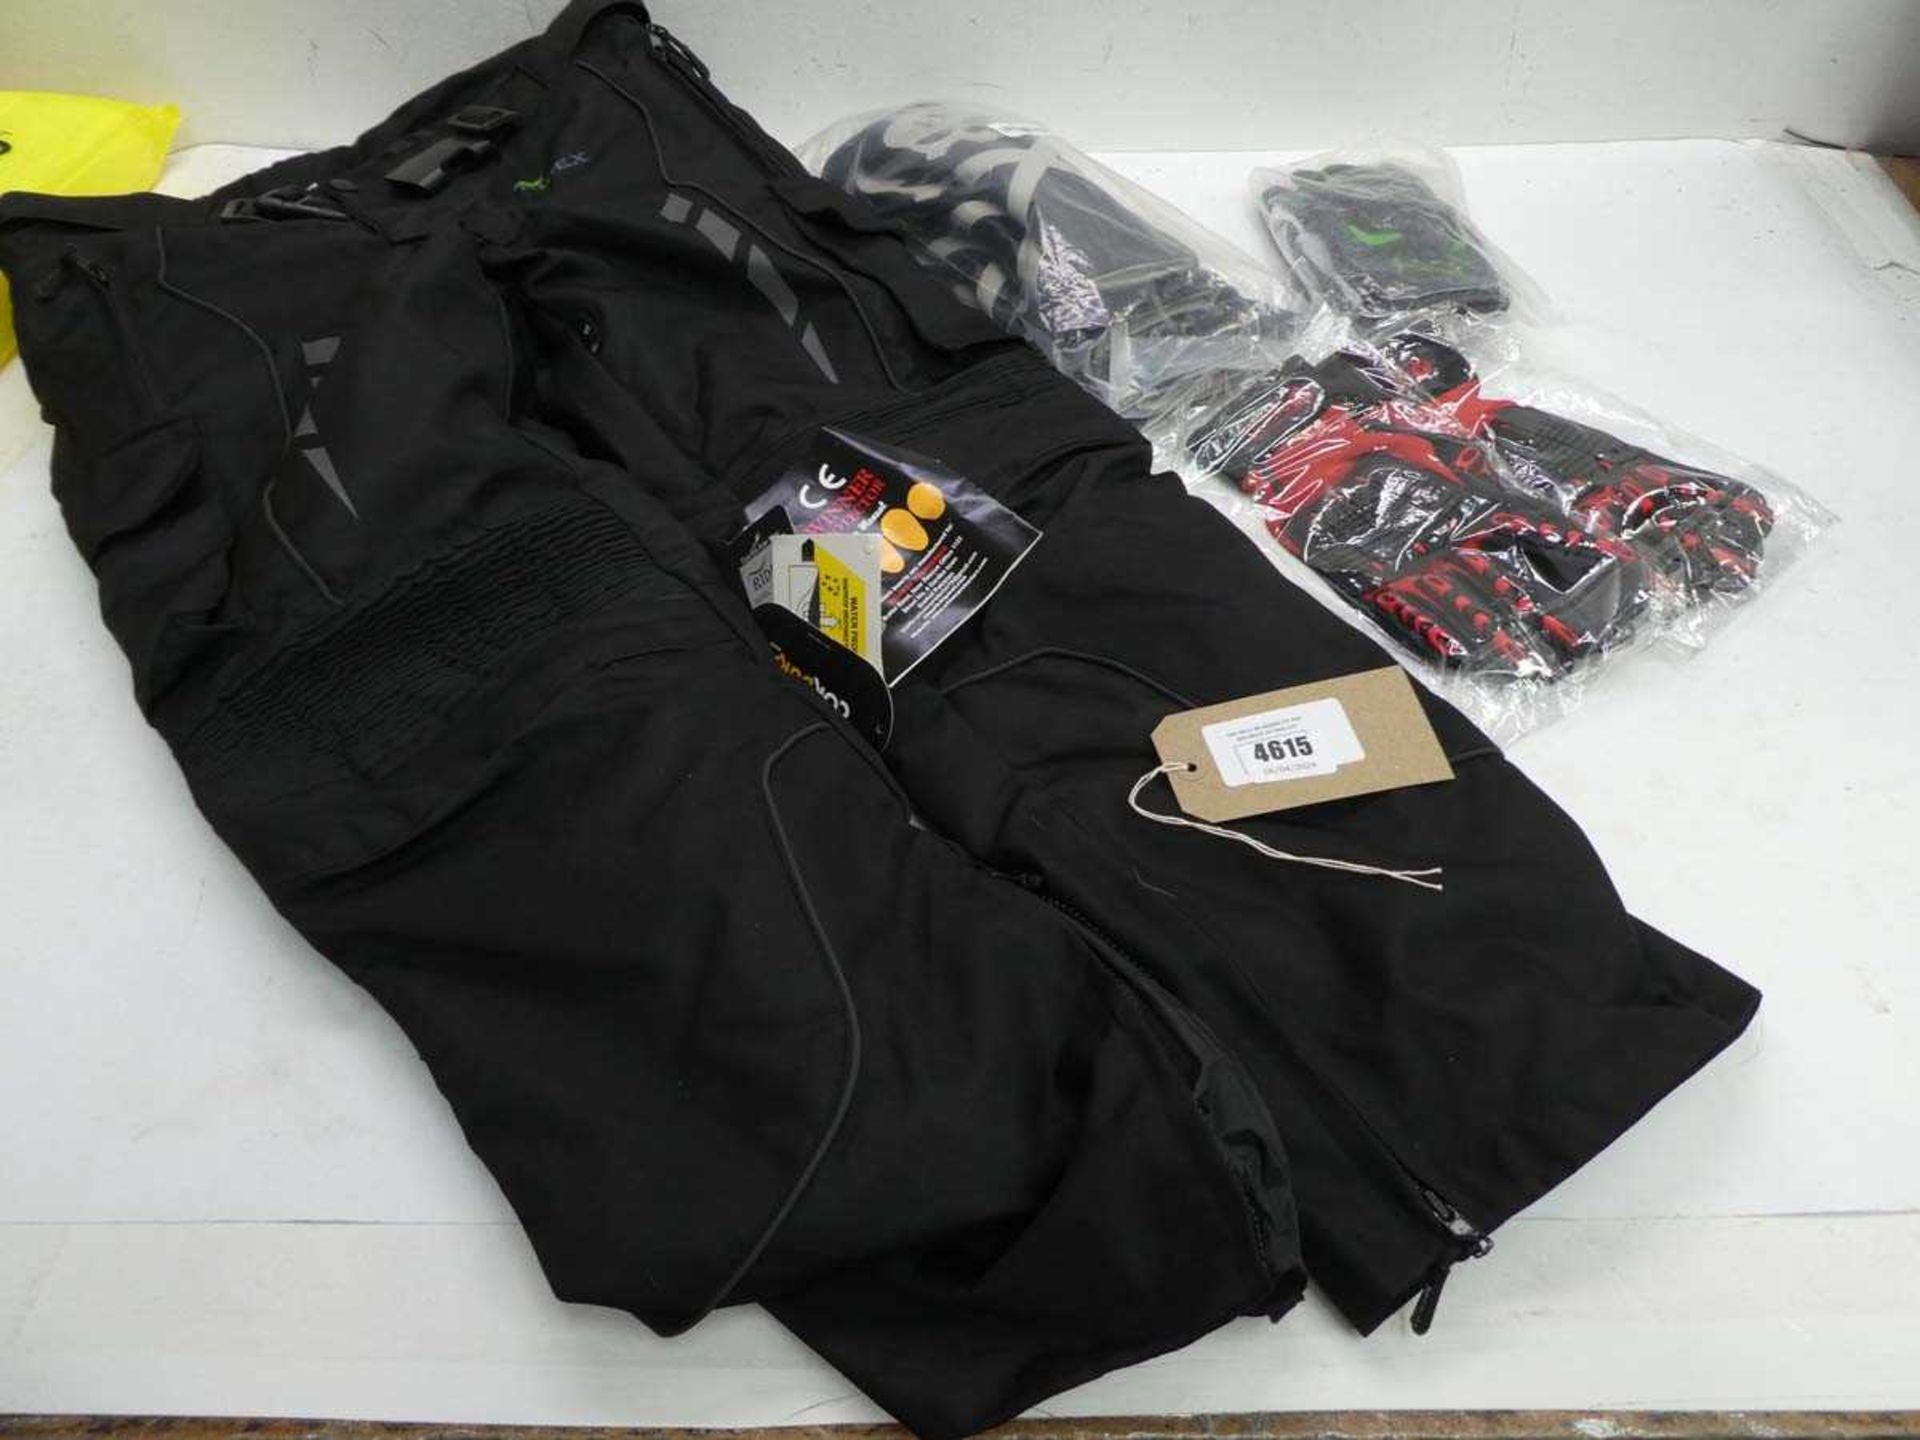 +VAT Ridex motorcycle trousers Size 36 and gloves